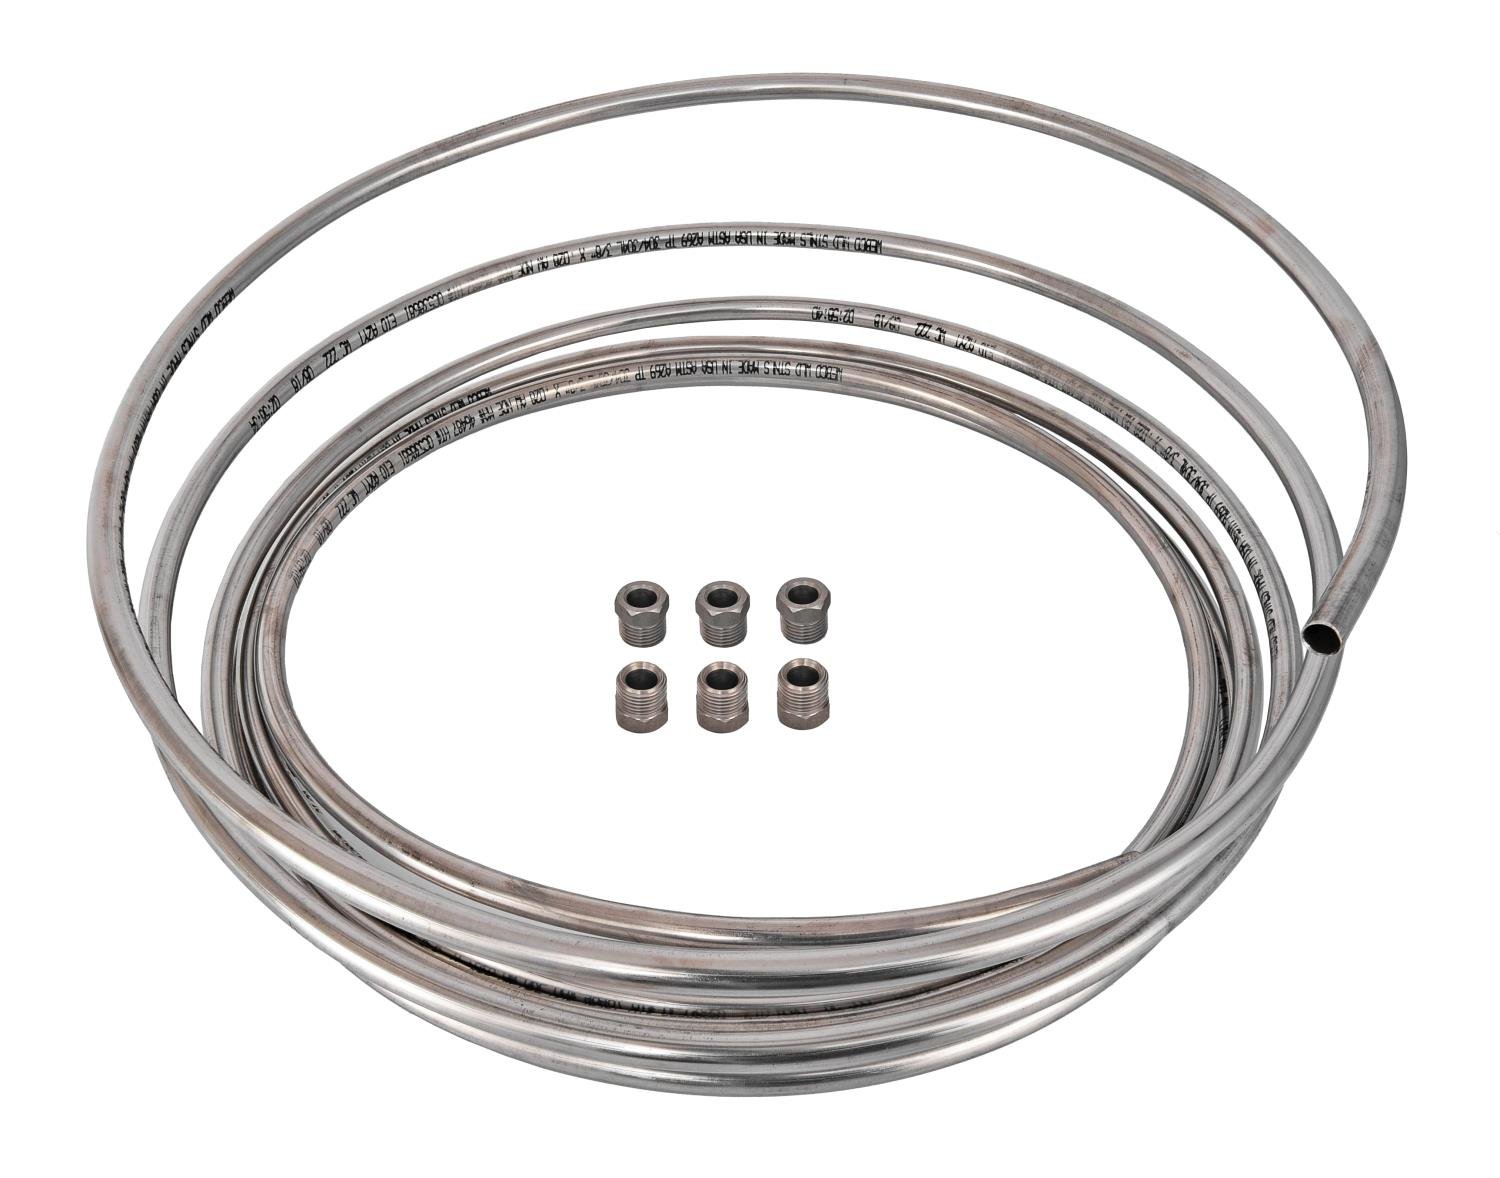 Stainless Steel Fuel Line Coil Kit 3/8" O.D. x 0.028" Wall